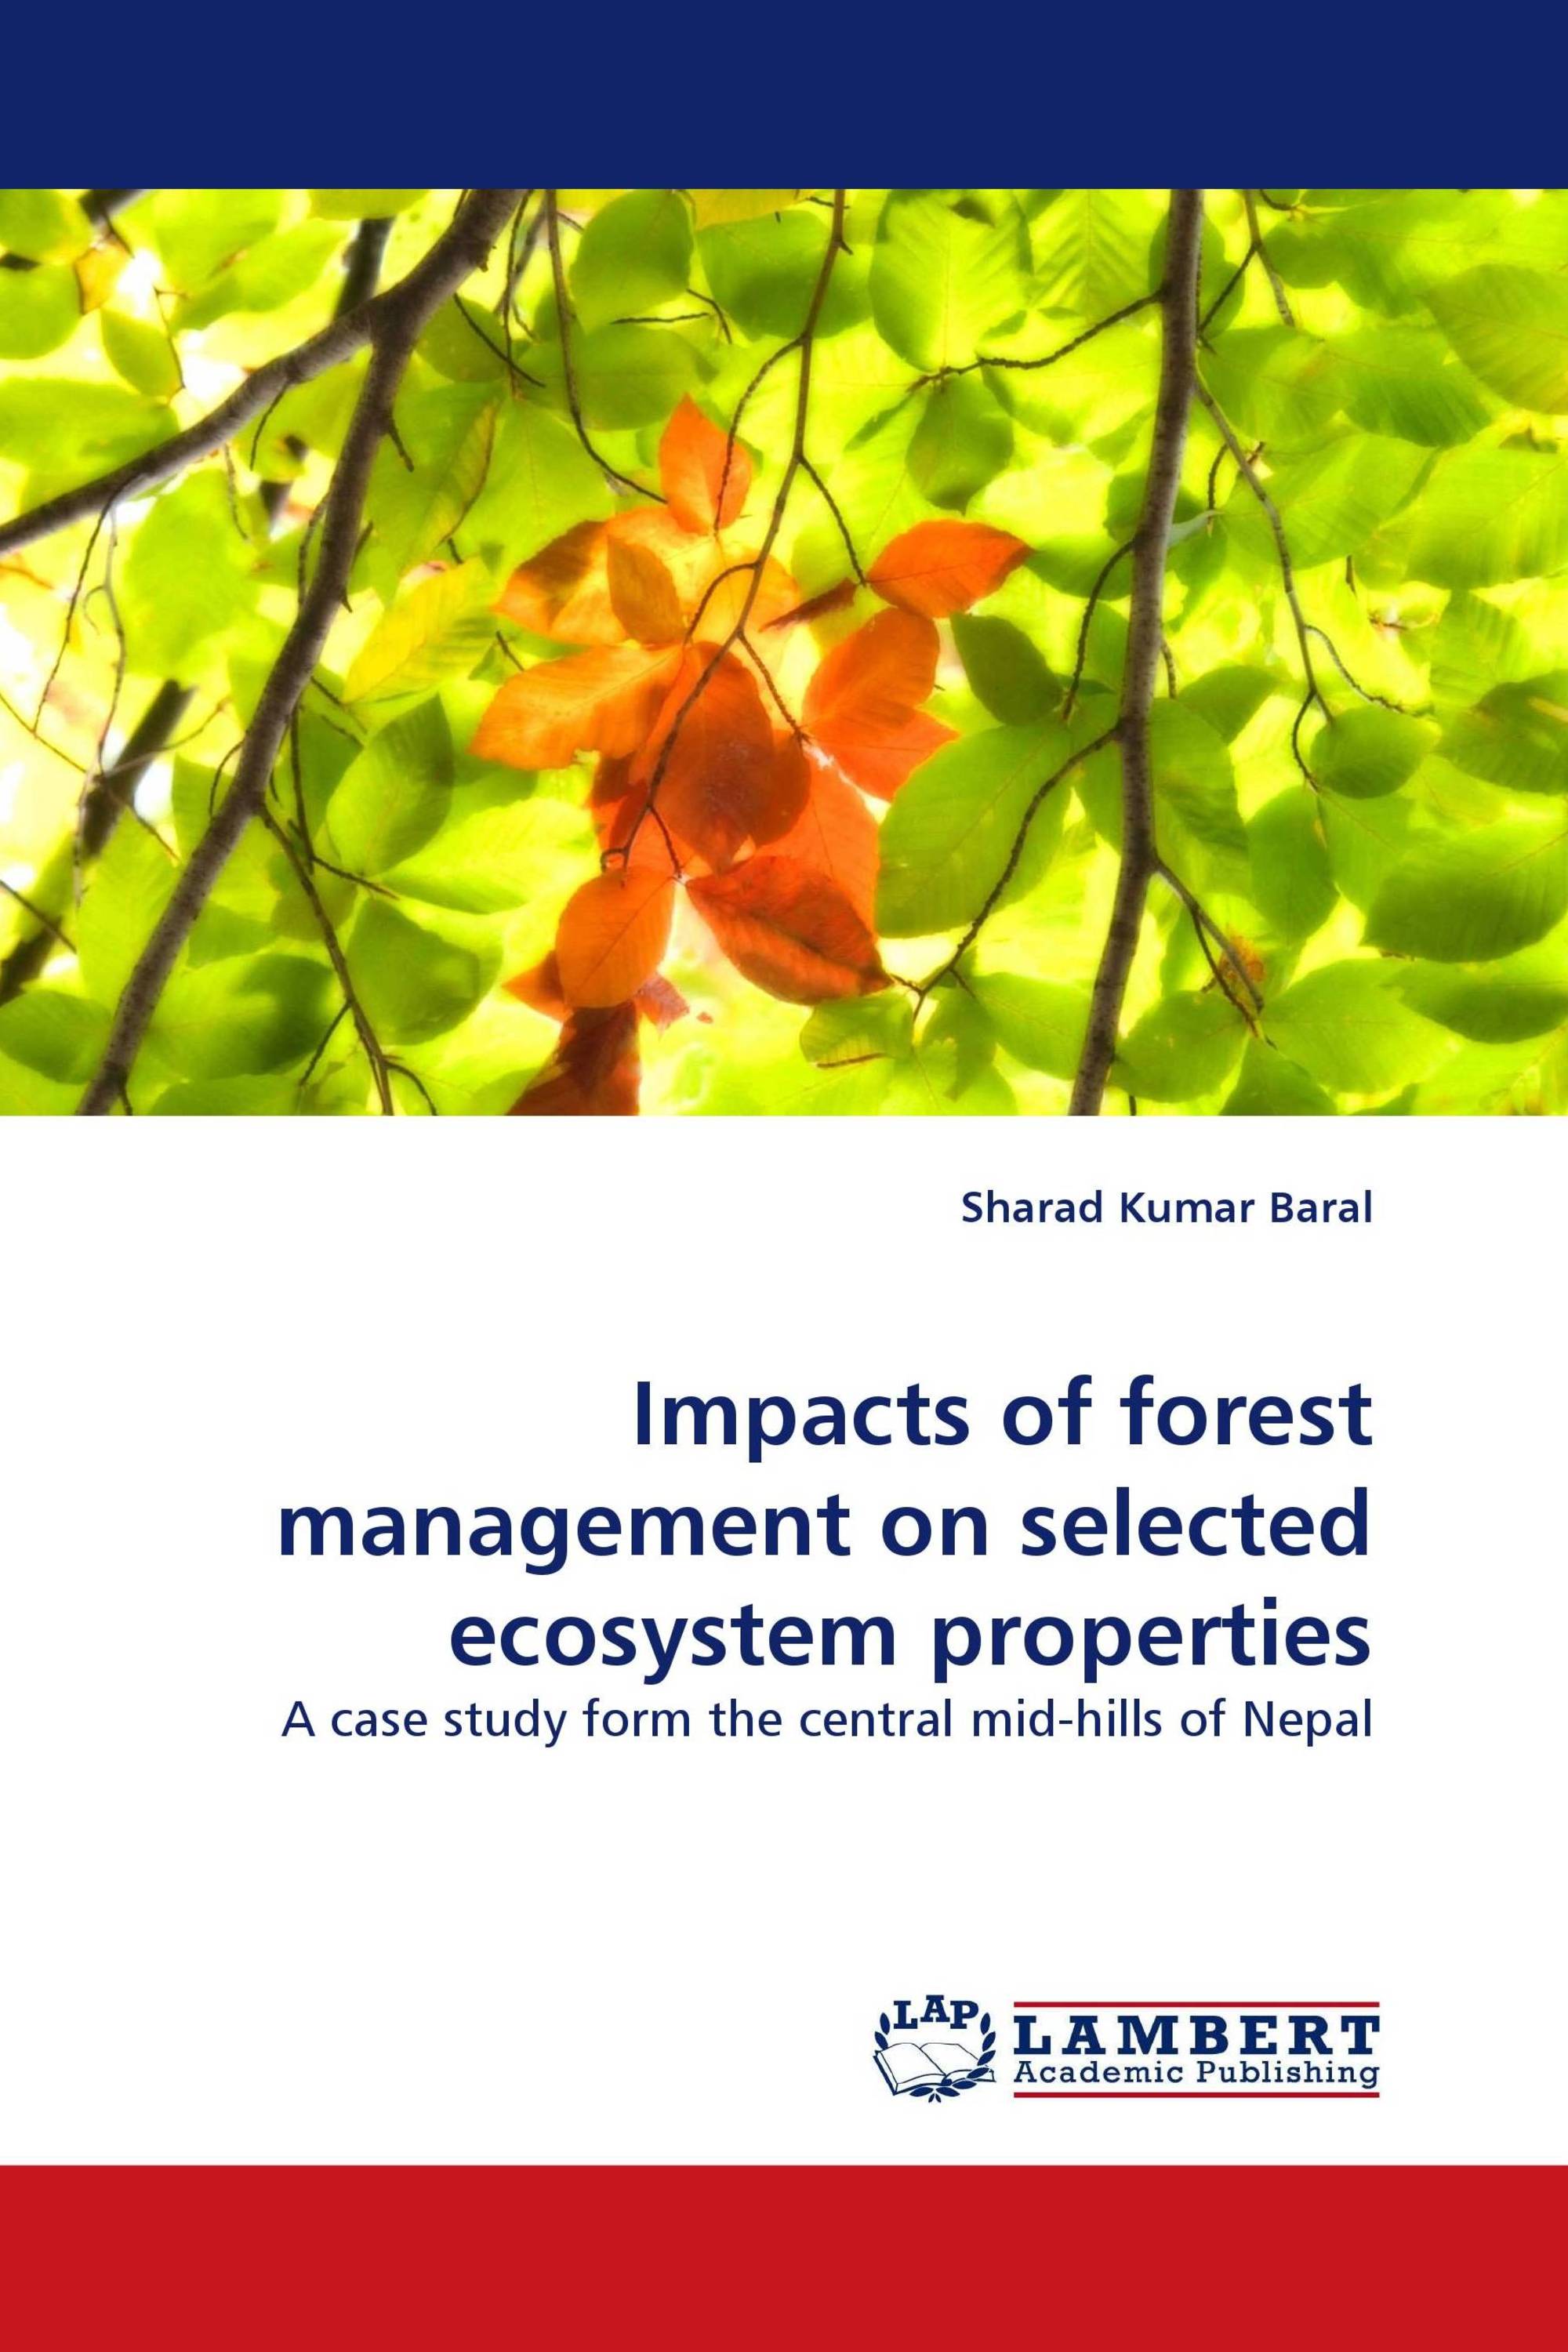 Impacts of forest management on selected ecosystem properties